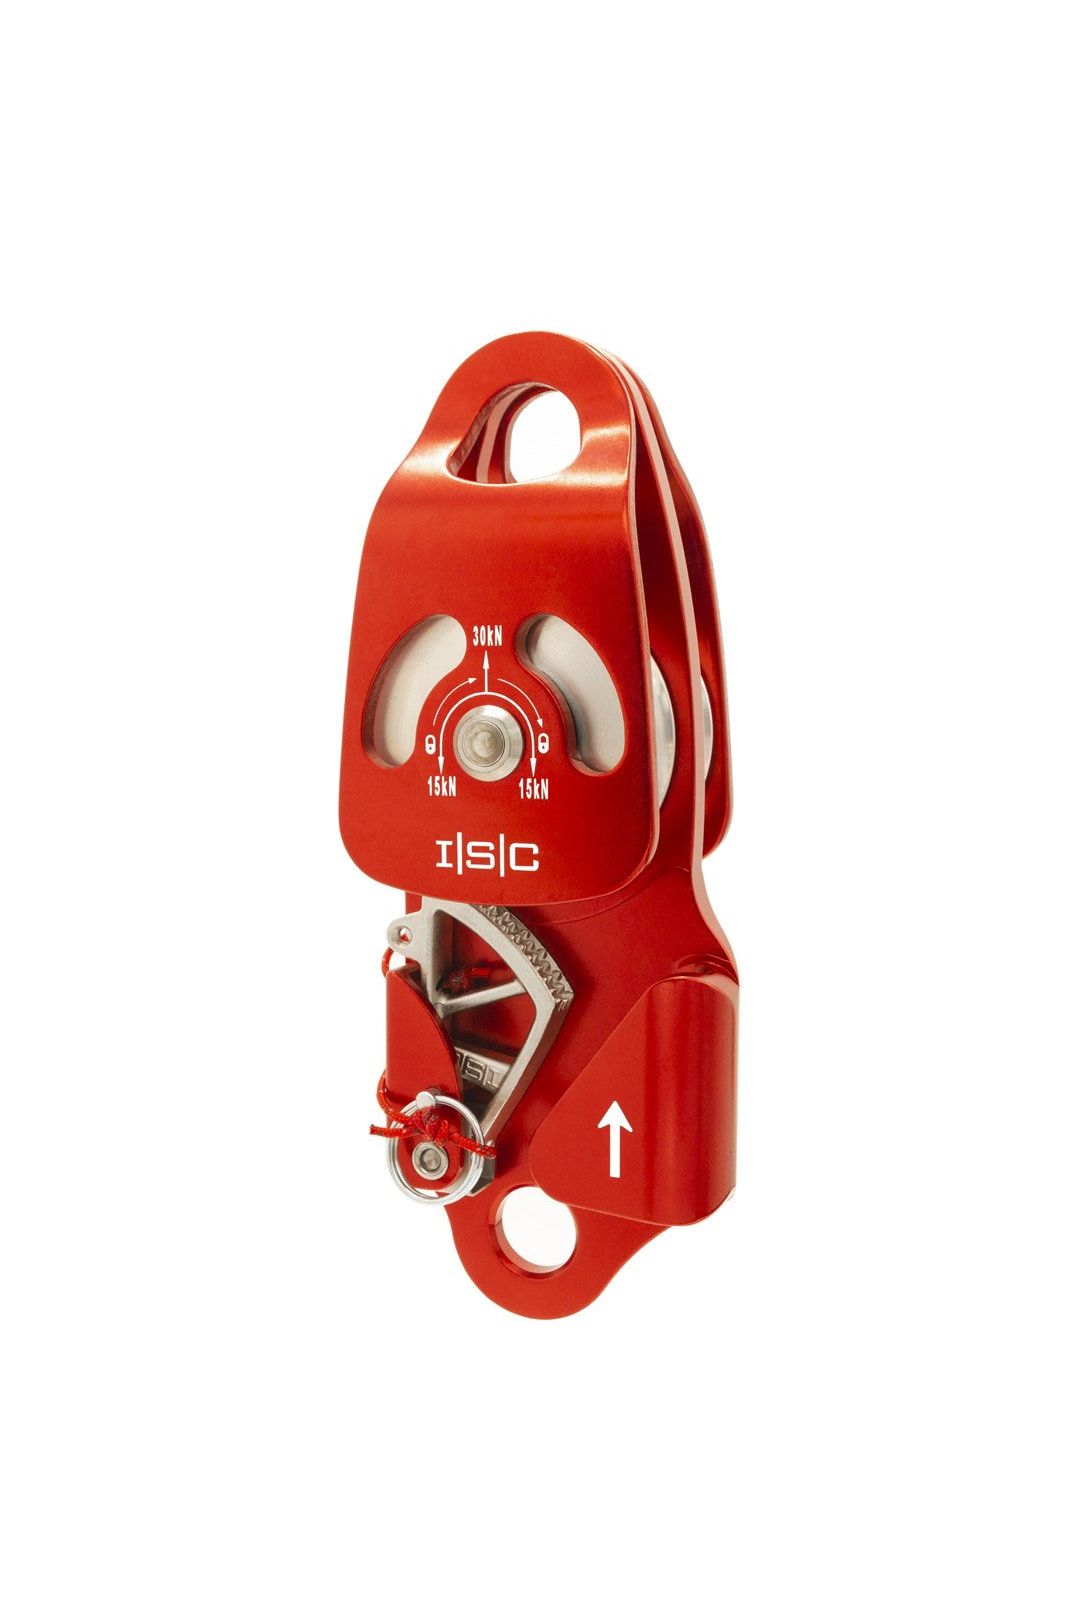 ISC One-Way Locking Double Progress Capture Pulley - Anton's Timber